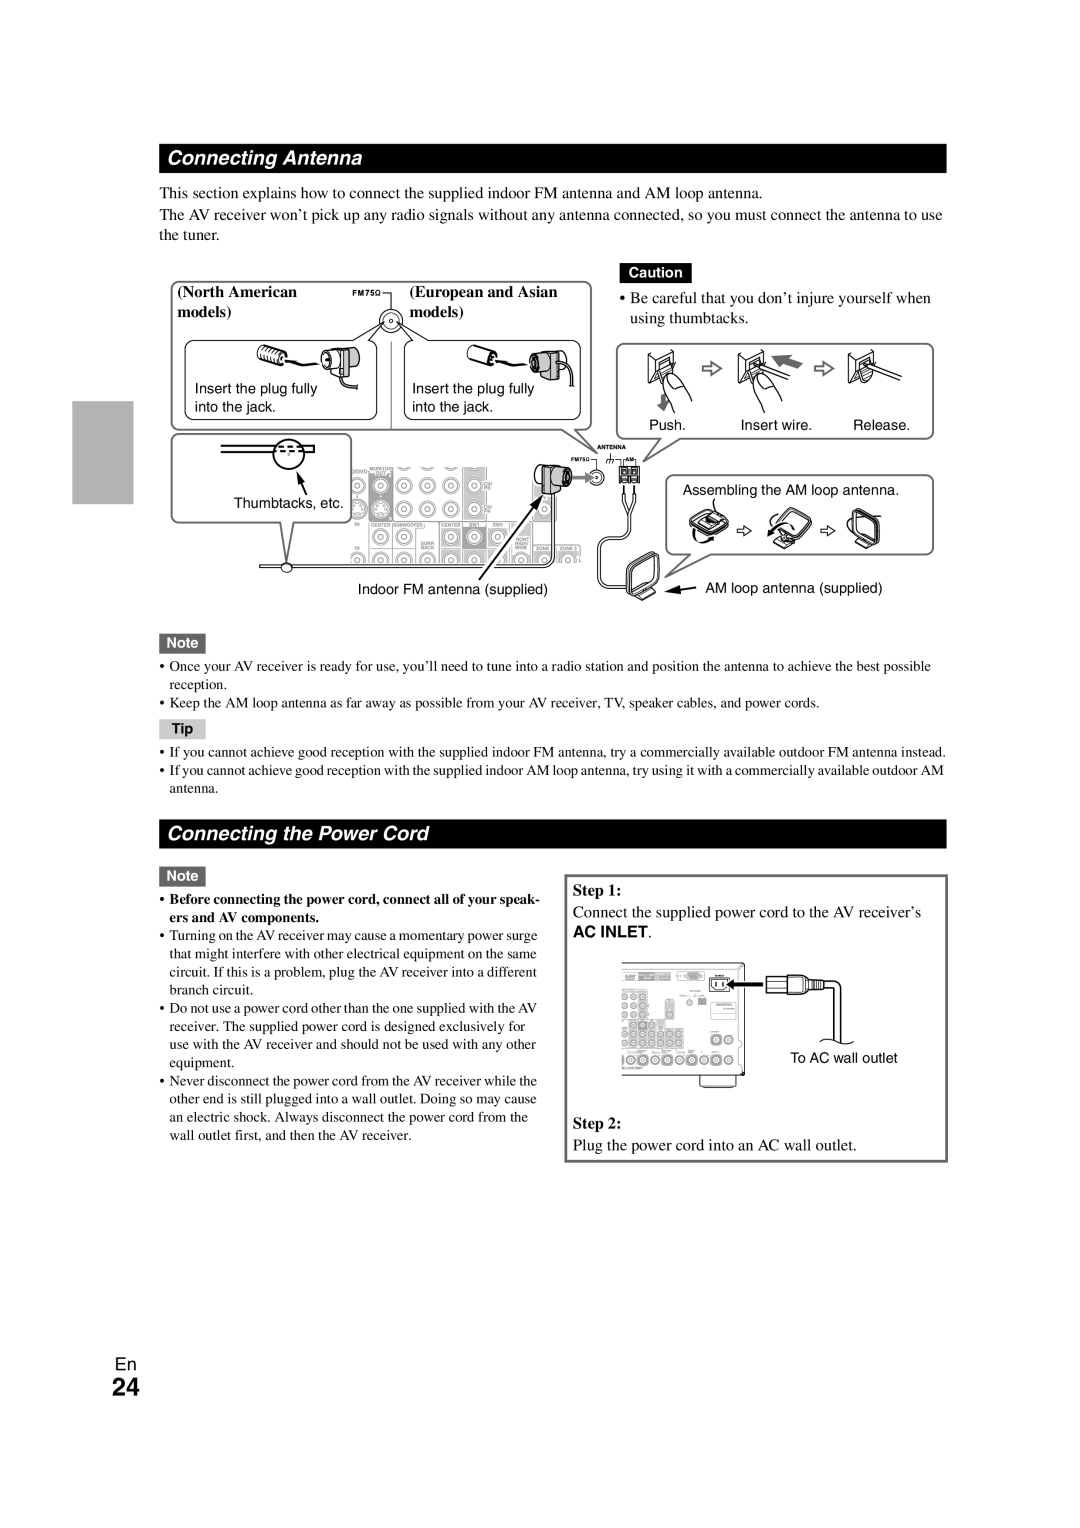 Onkyo TX-NR3008 instruction manual Connecting Antenna, Connecting the Power Cord, Ac Inlet 